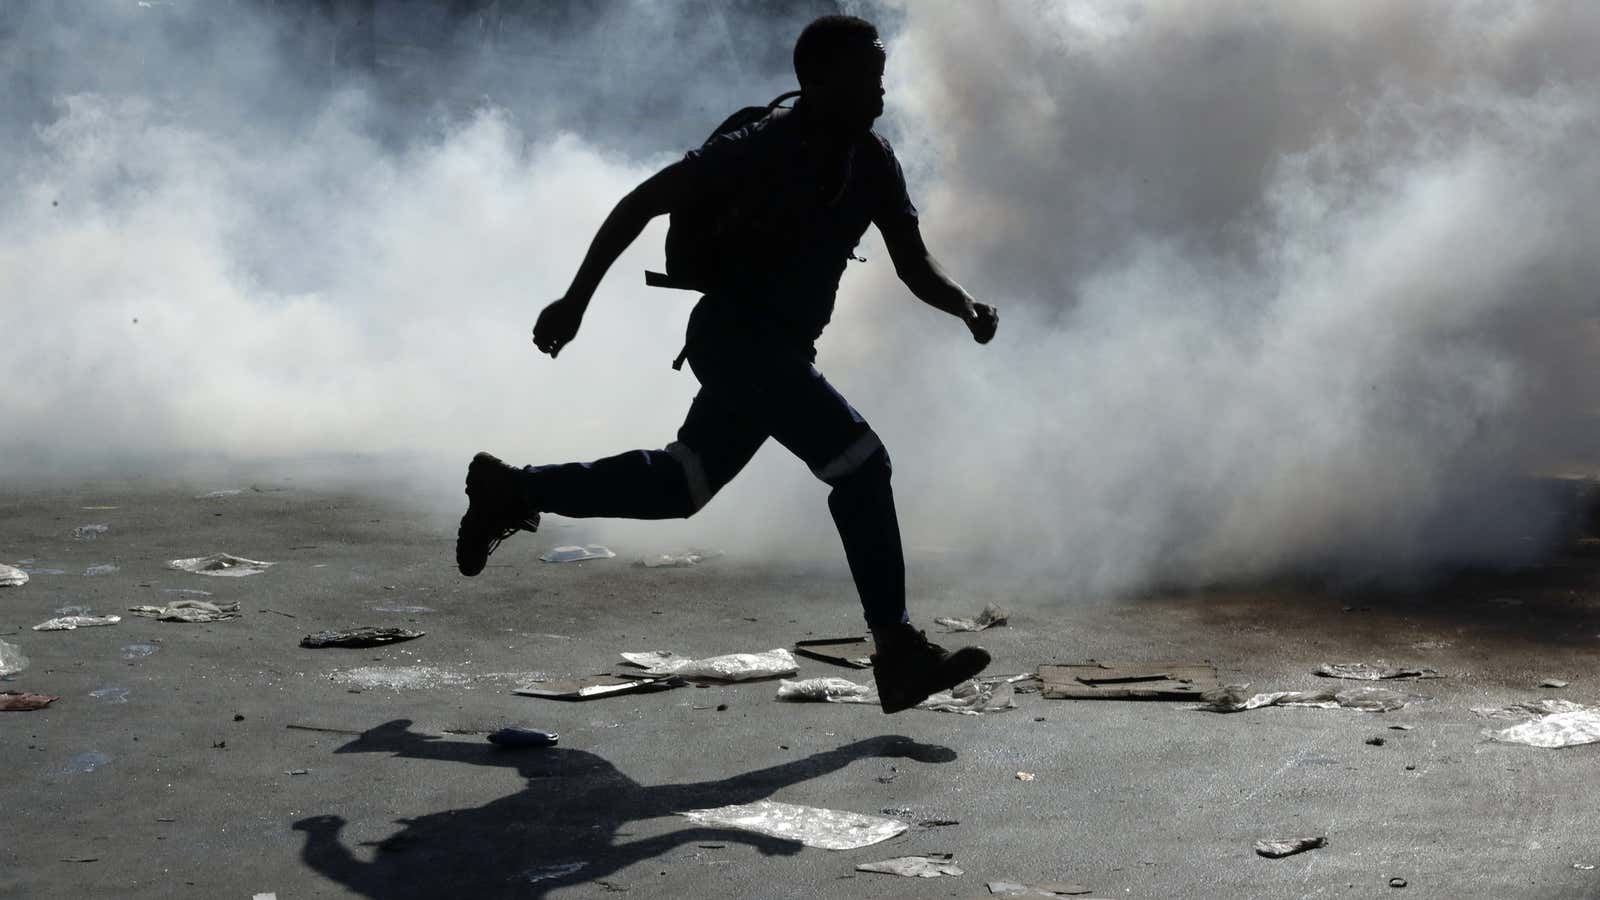 A man runs away from teargas after making off with goods from a store in Germiston, east of Johannesburg, South Africa, Sep. 3, 2019.